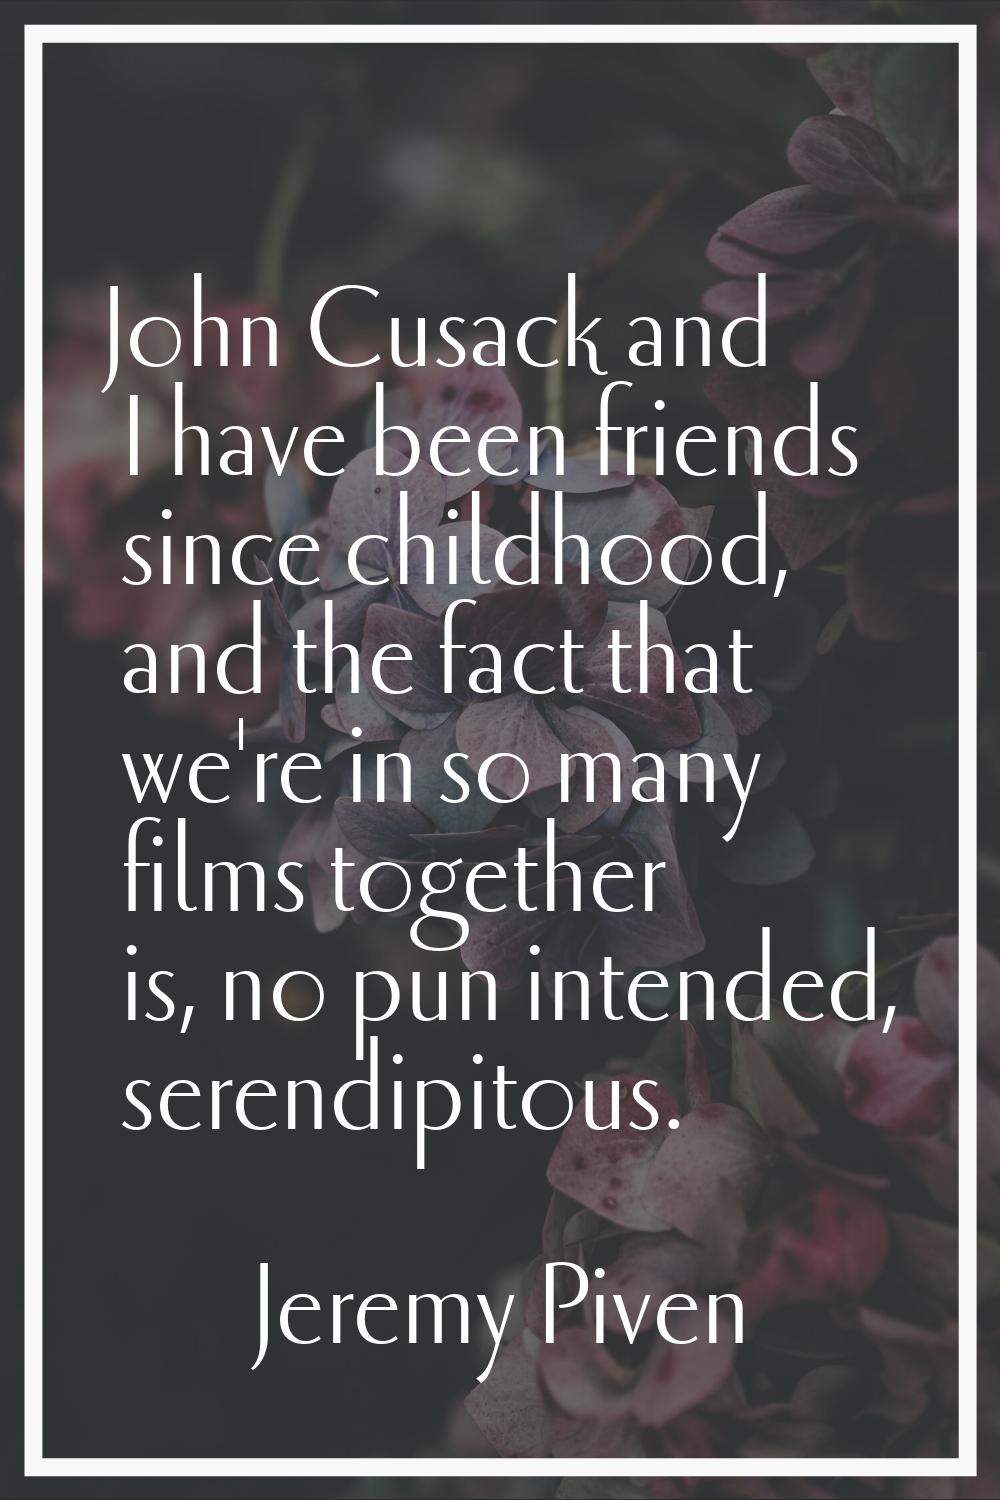 John Cusack and I have been friends since childhood, and the fact that we're in so many films toget